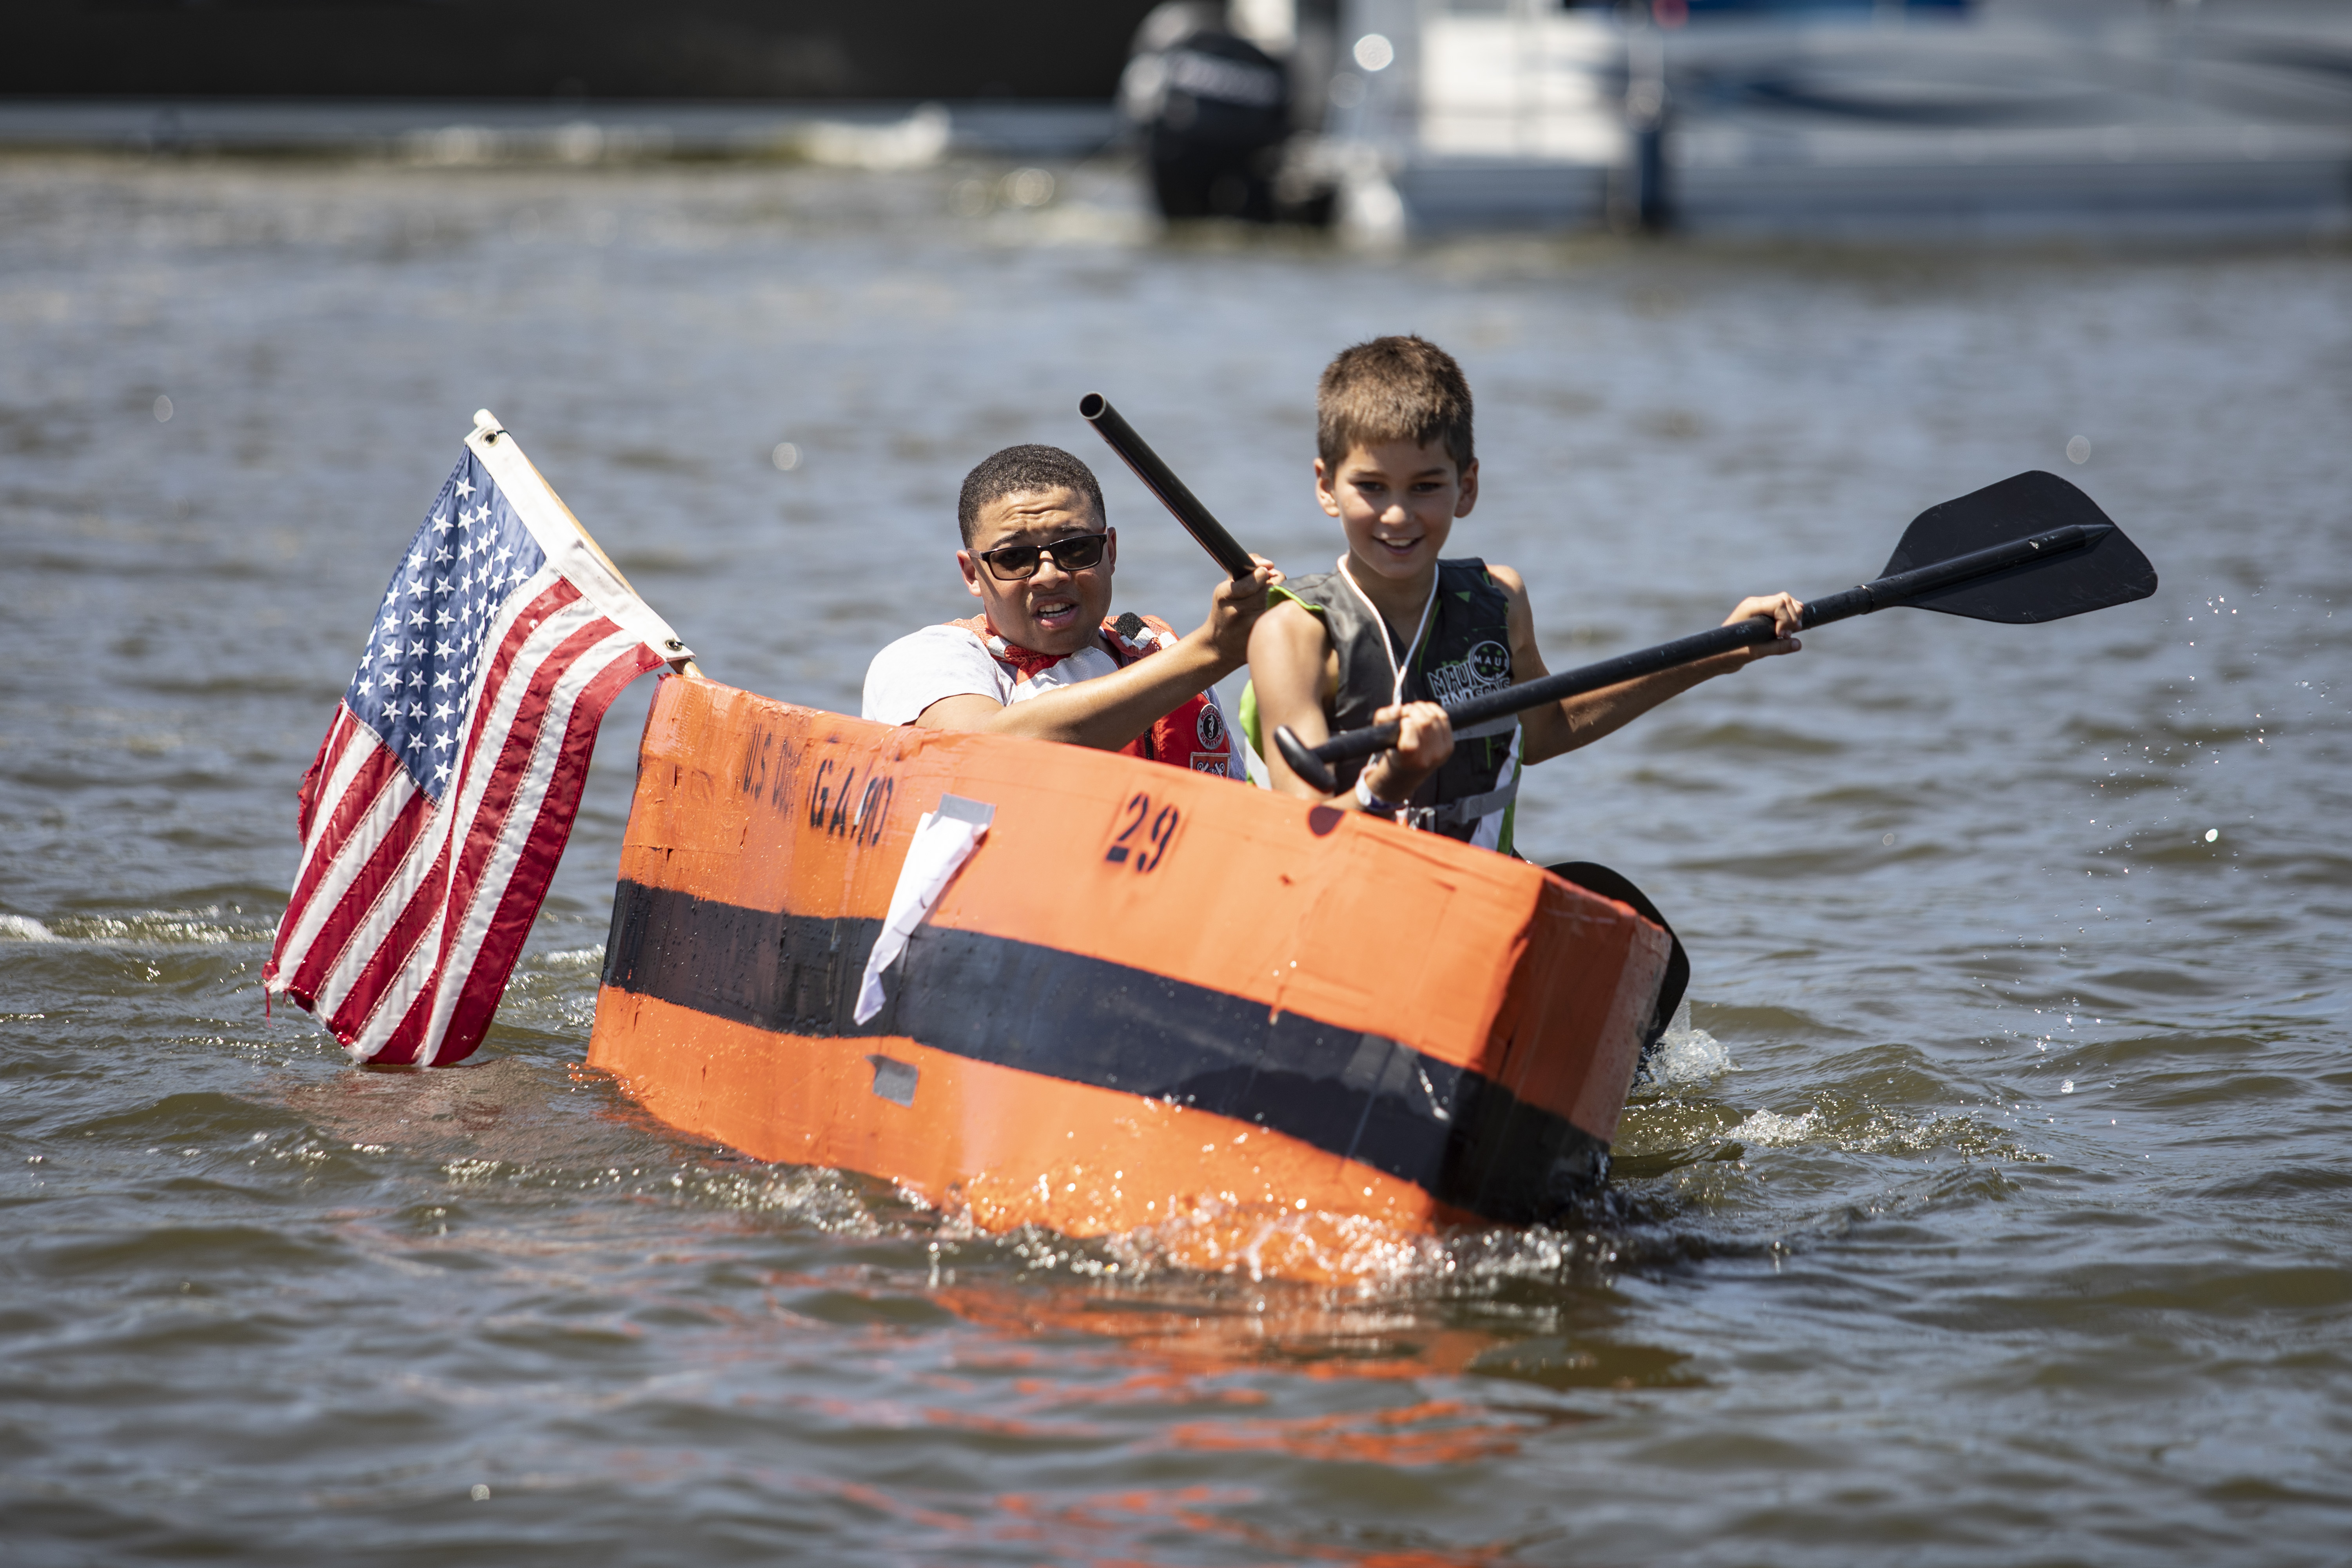 Will it float? Makeshift cardboard boats take to the water during